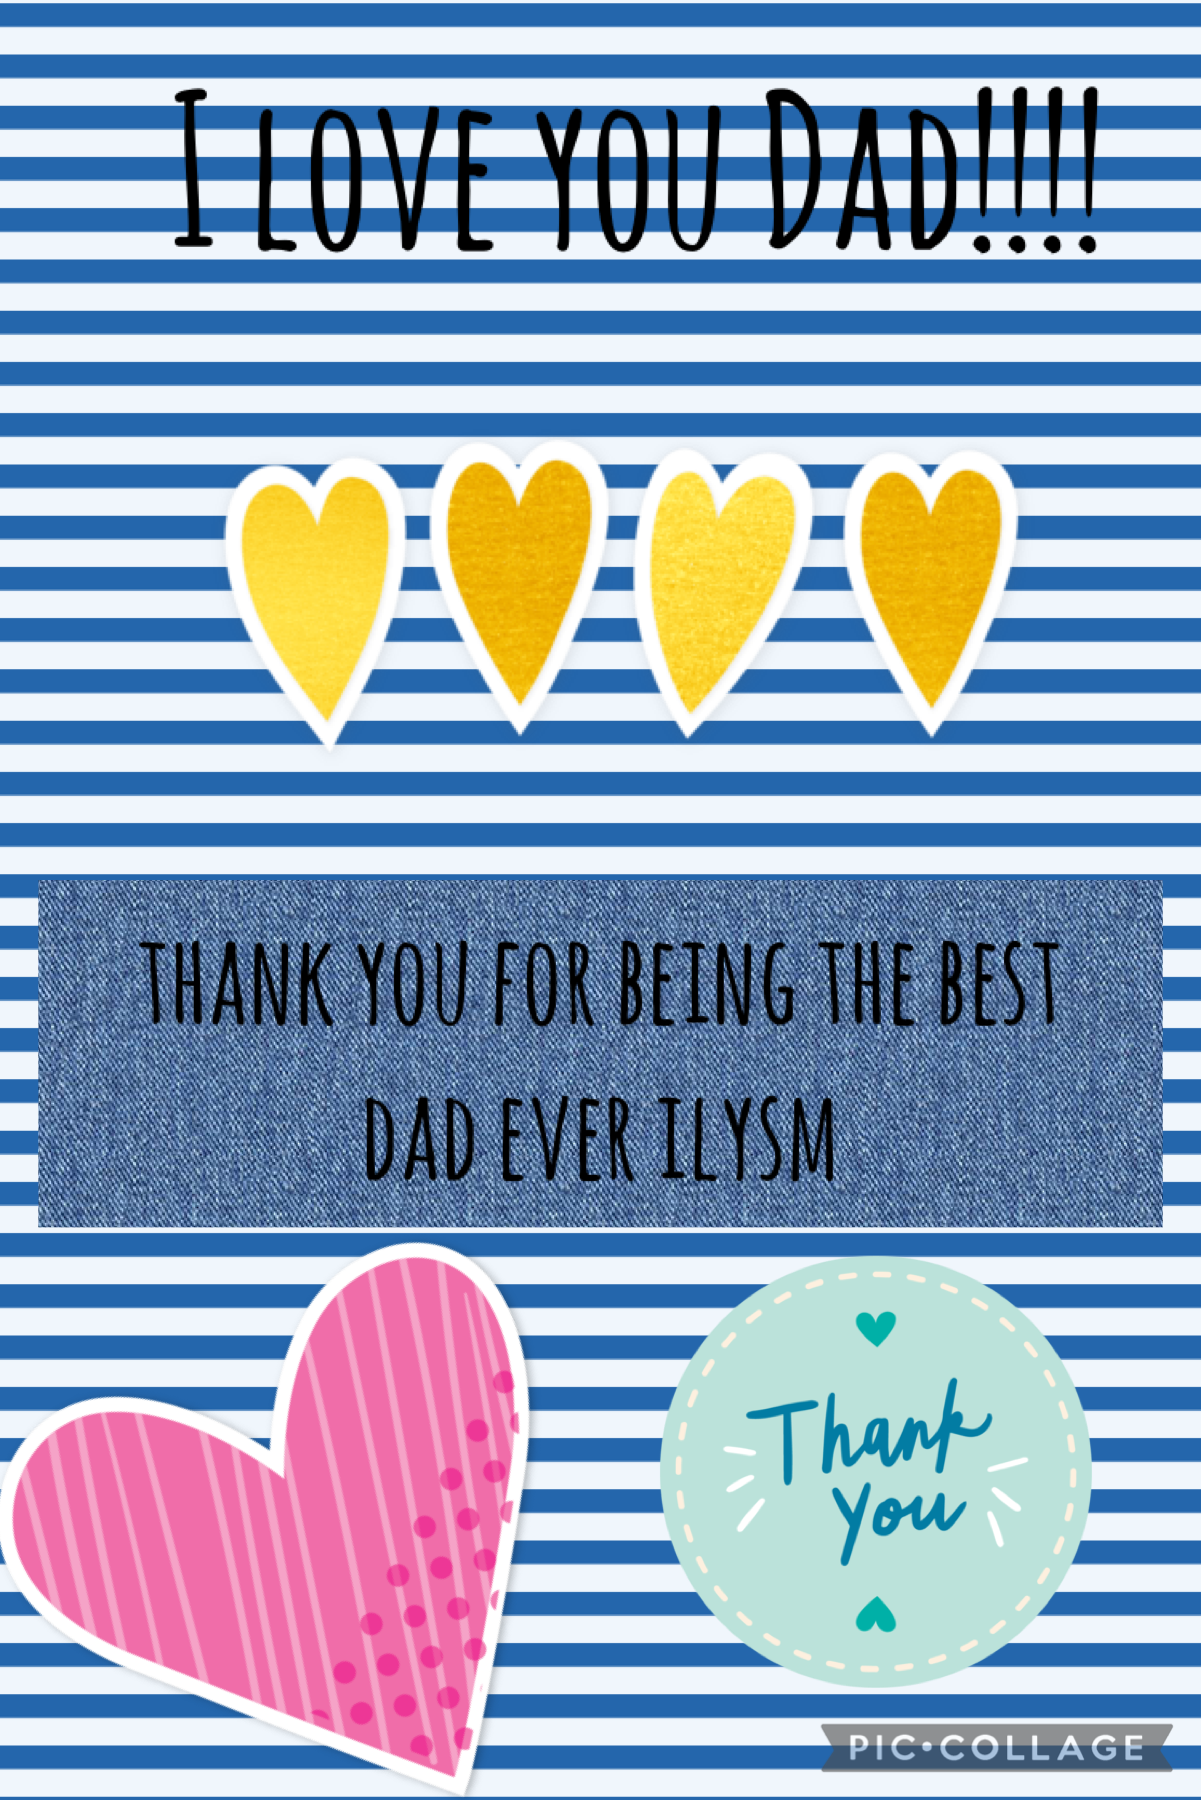 father's day card!
